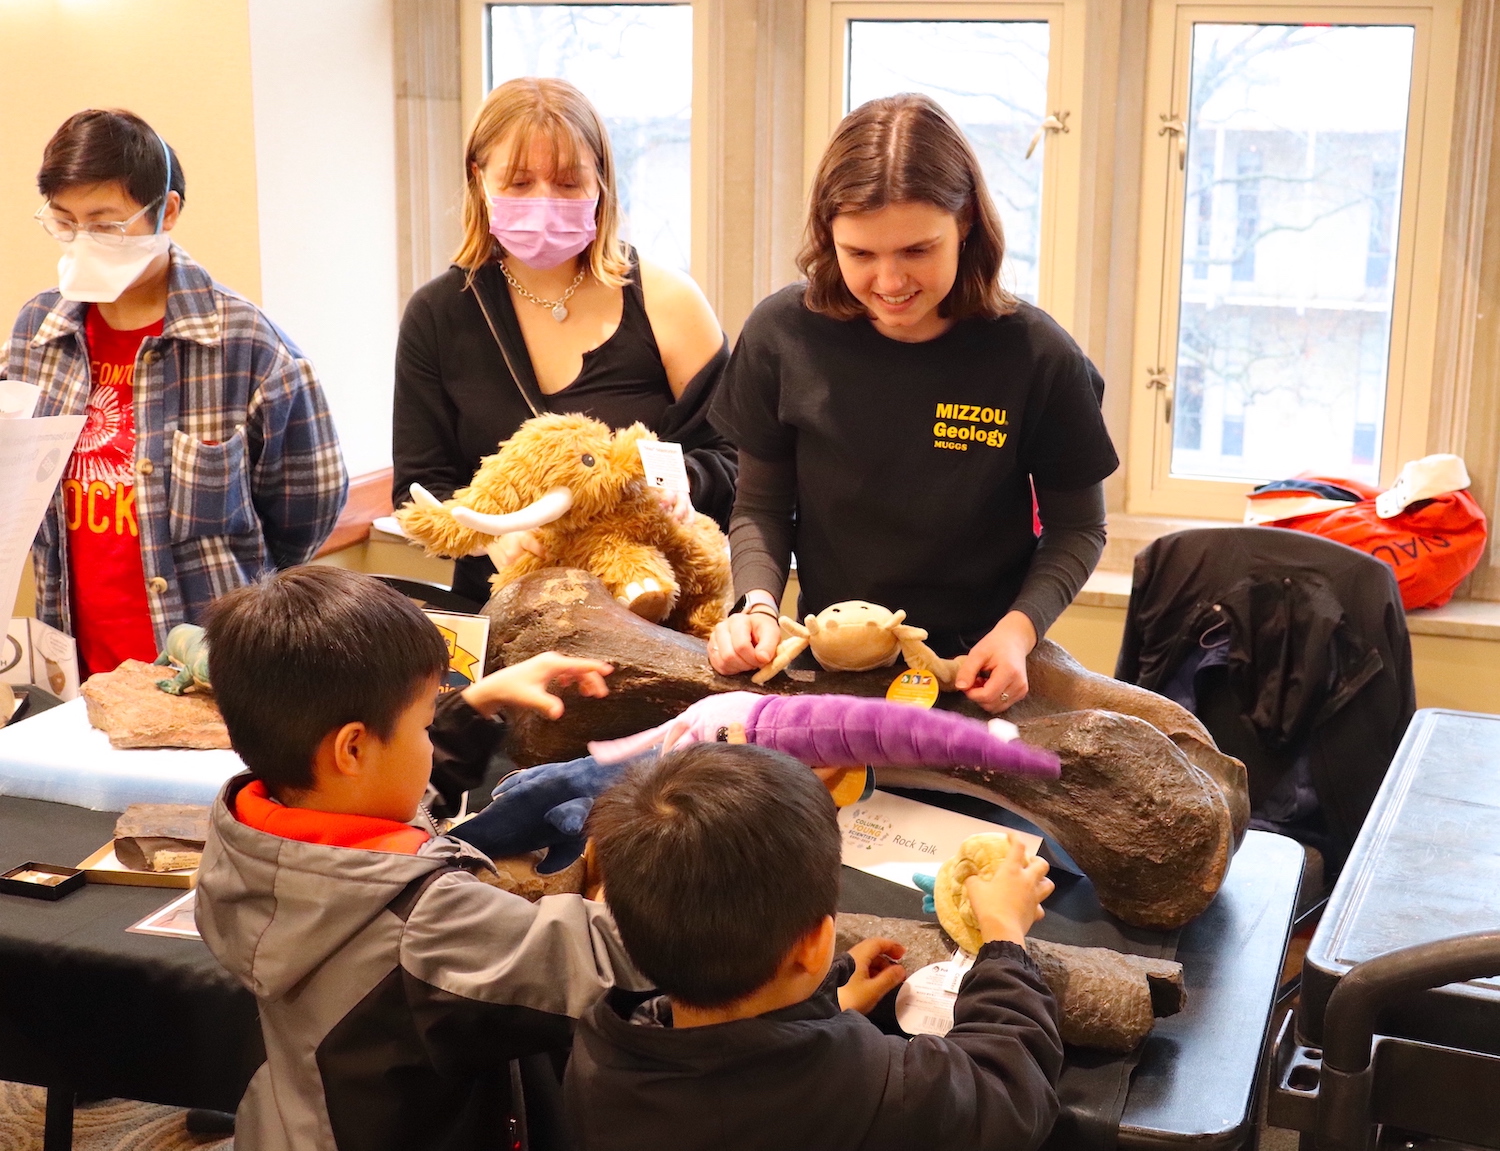 About 600 children and their parents explored University of Missouri science, technology, engineering and math research and creative activity hands-on during the Columbia Young Scientists Expo. Here, a researcher shows childen fossils.